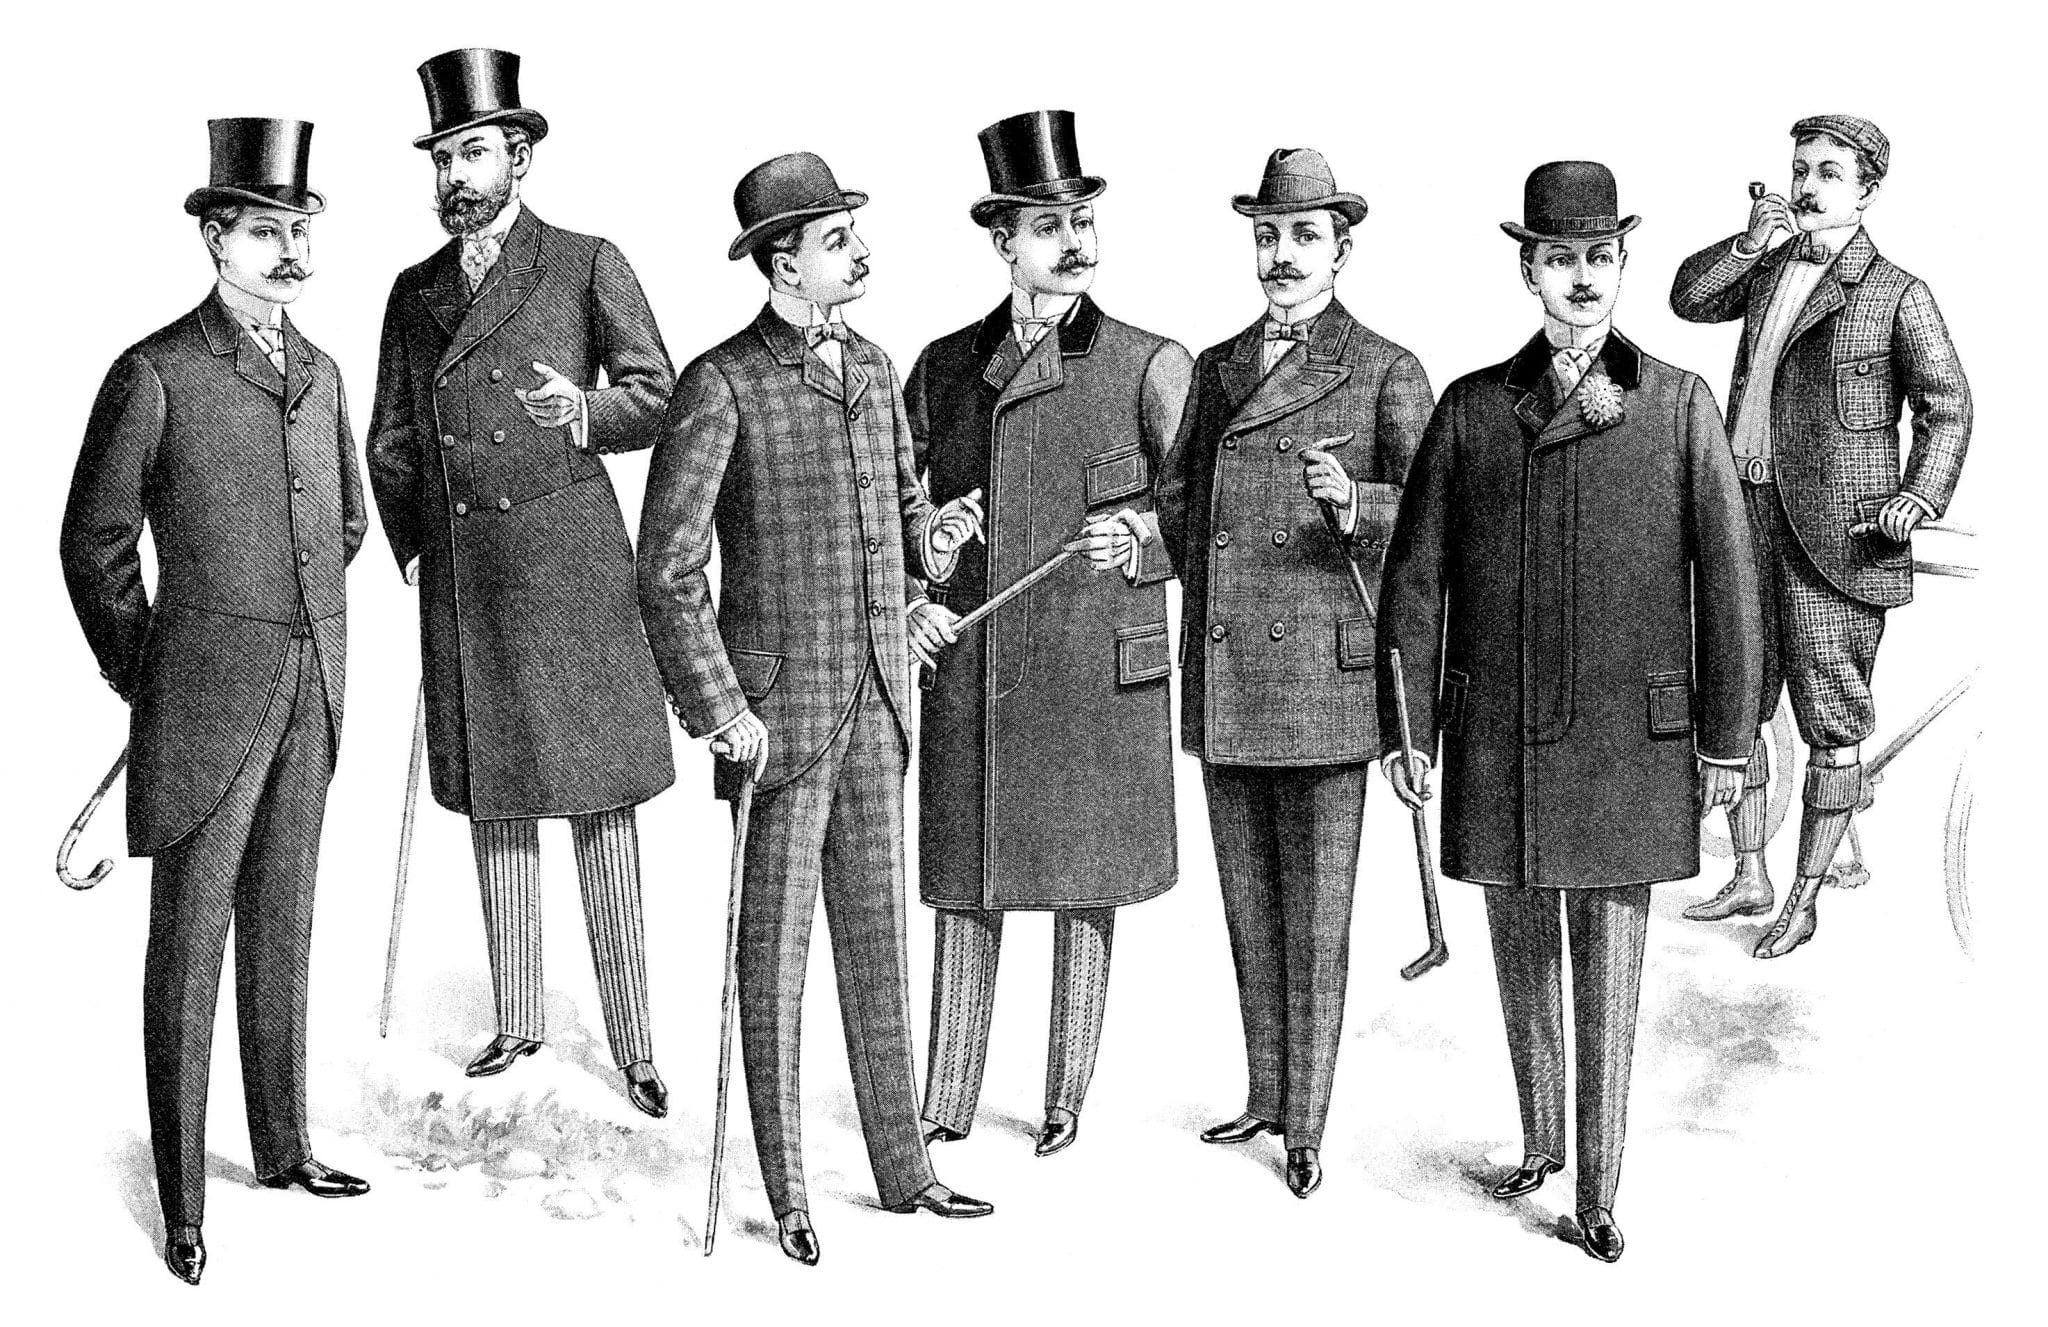 Victorian men wearing jackets and trousers